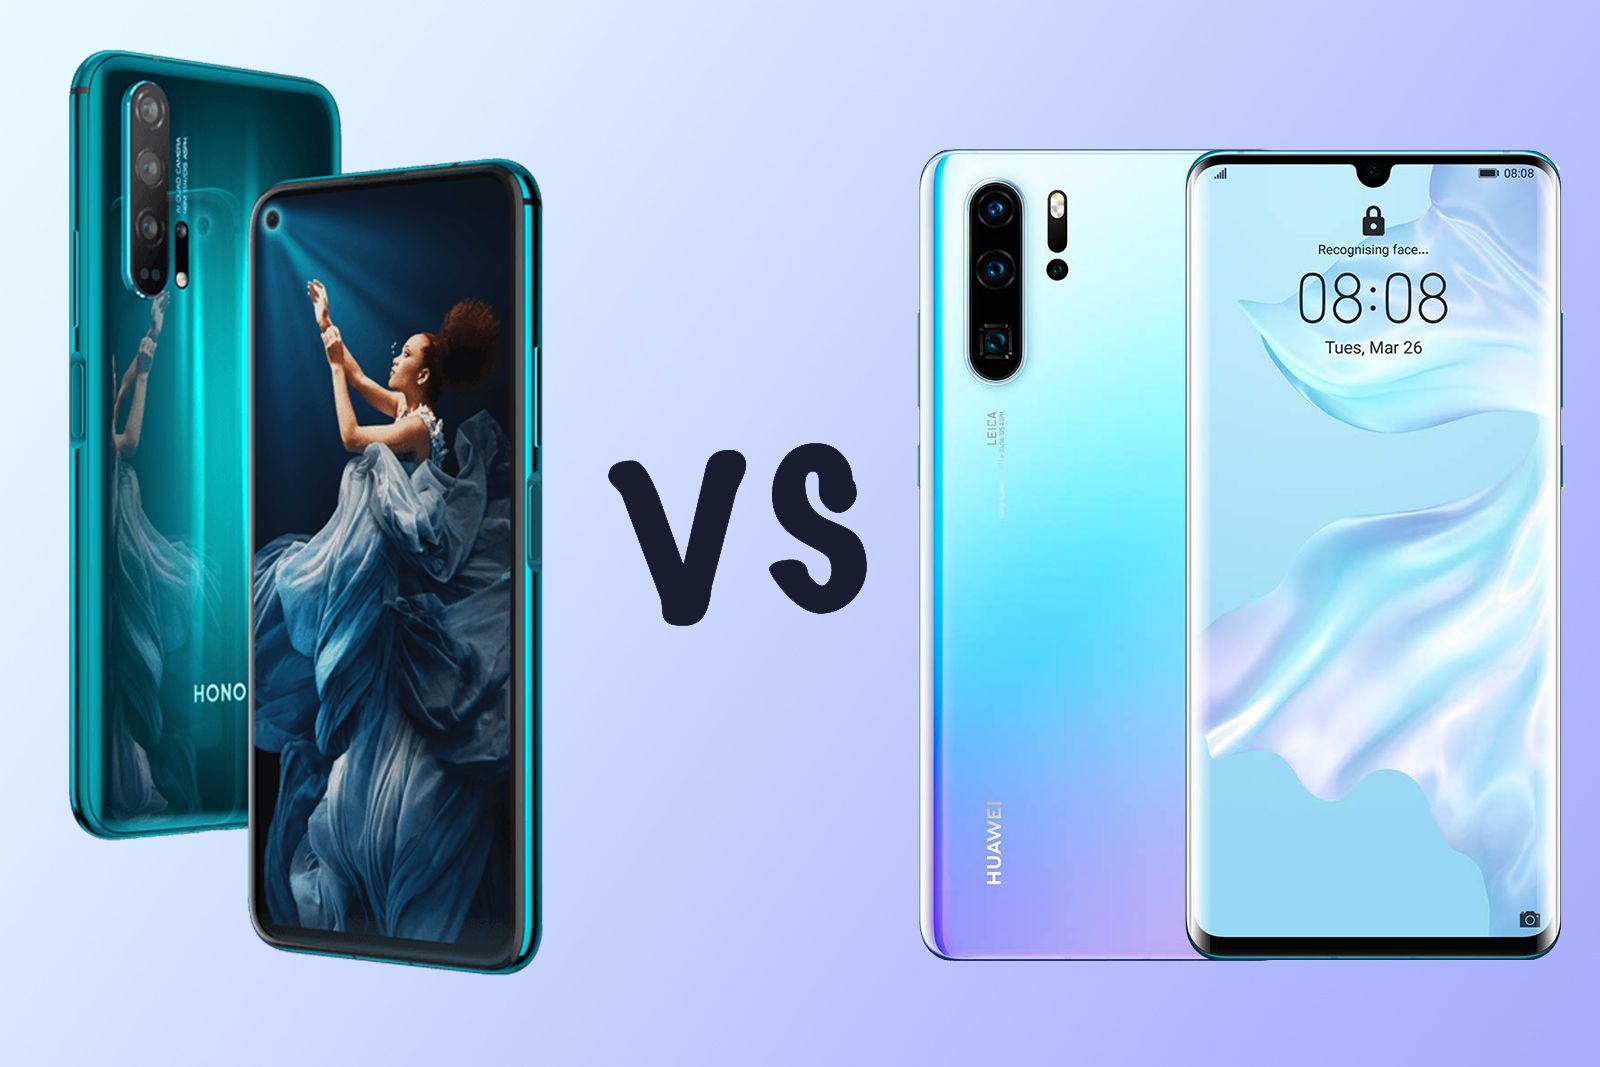 Honor 20 Pro Vs Huawei P30 Pro Which Should You Buy image 1